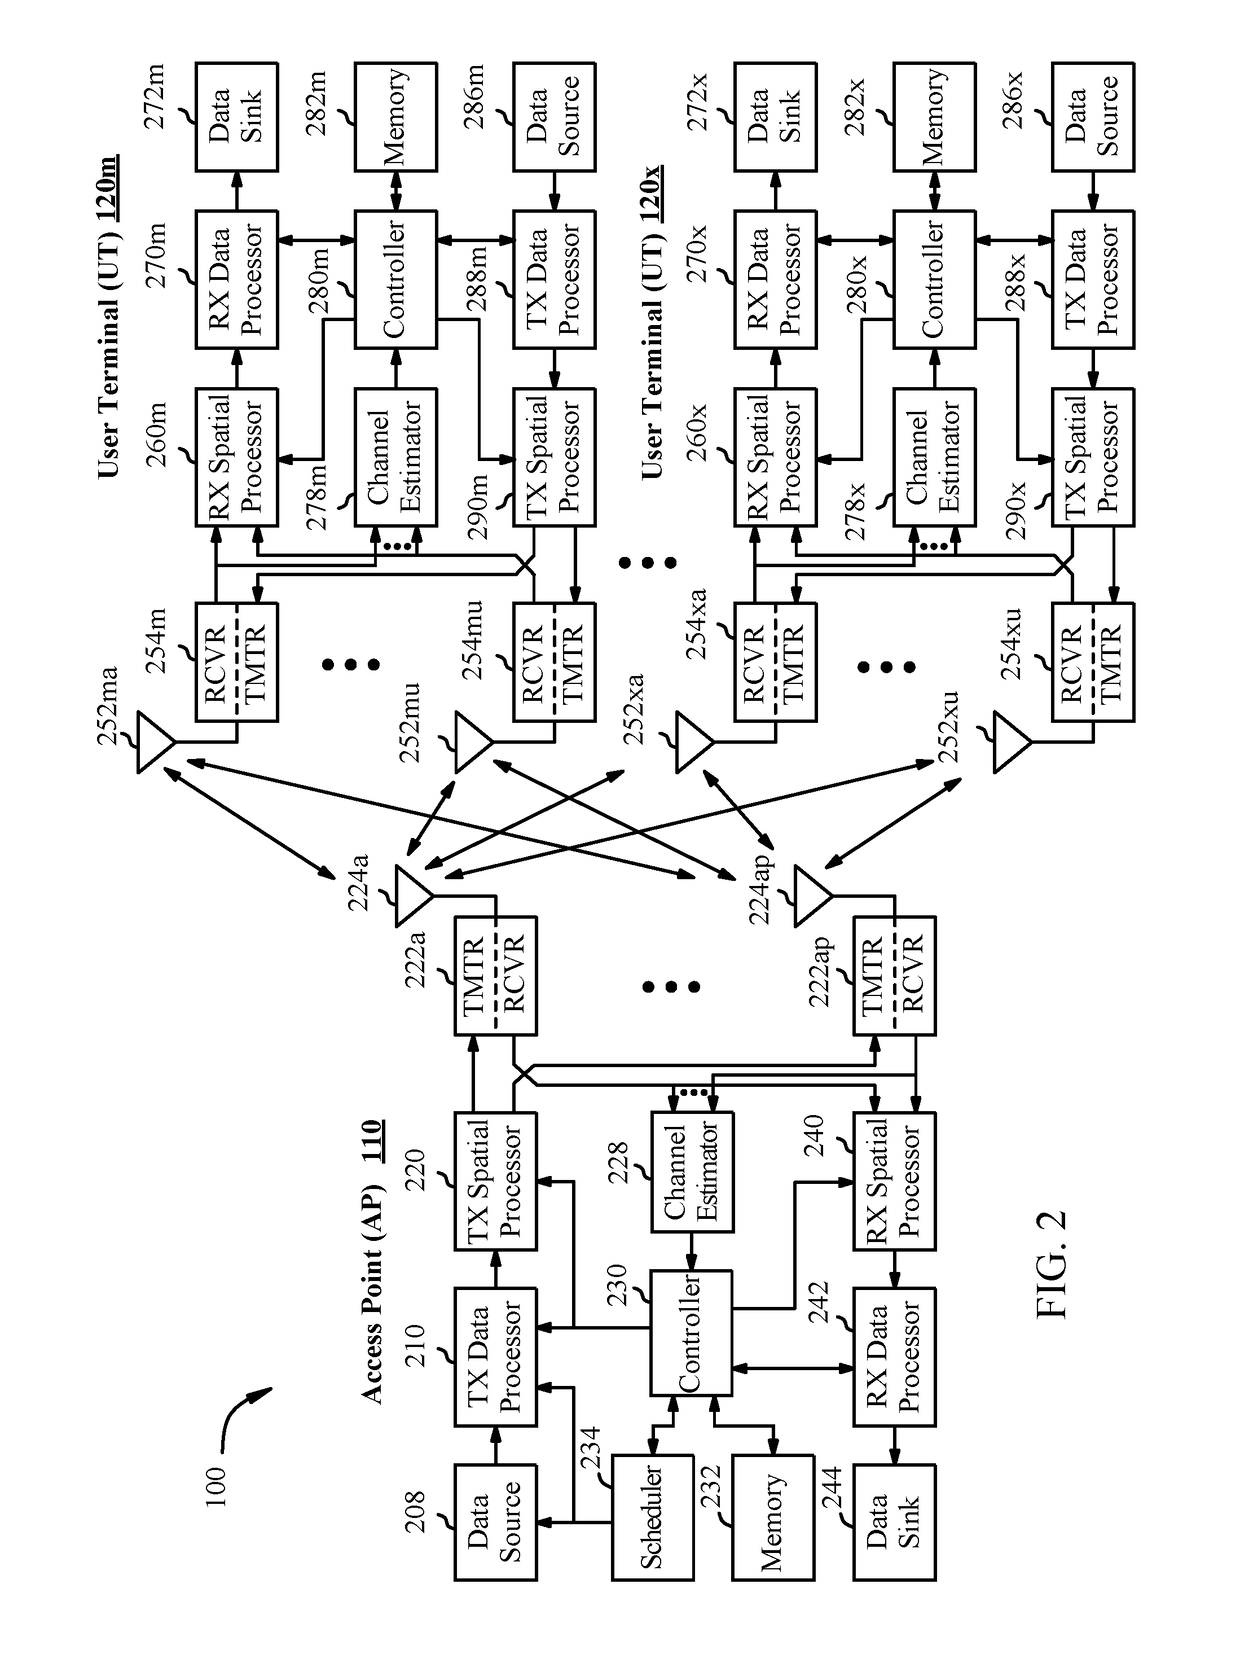 Downlink (DL) coordinated beamforming protocols for WIFI